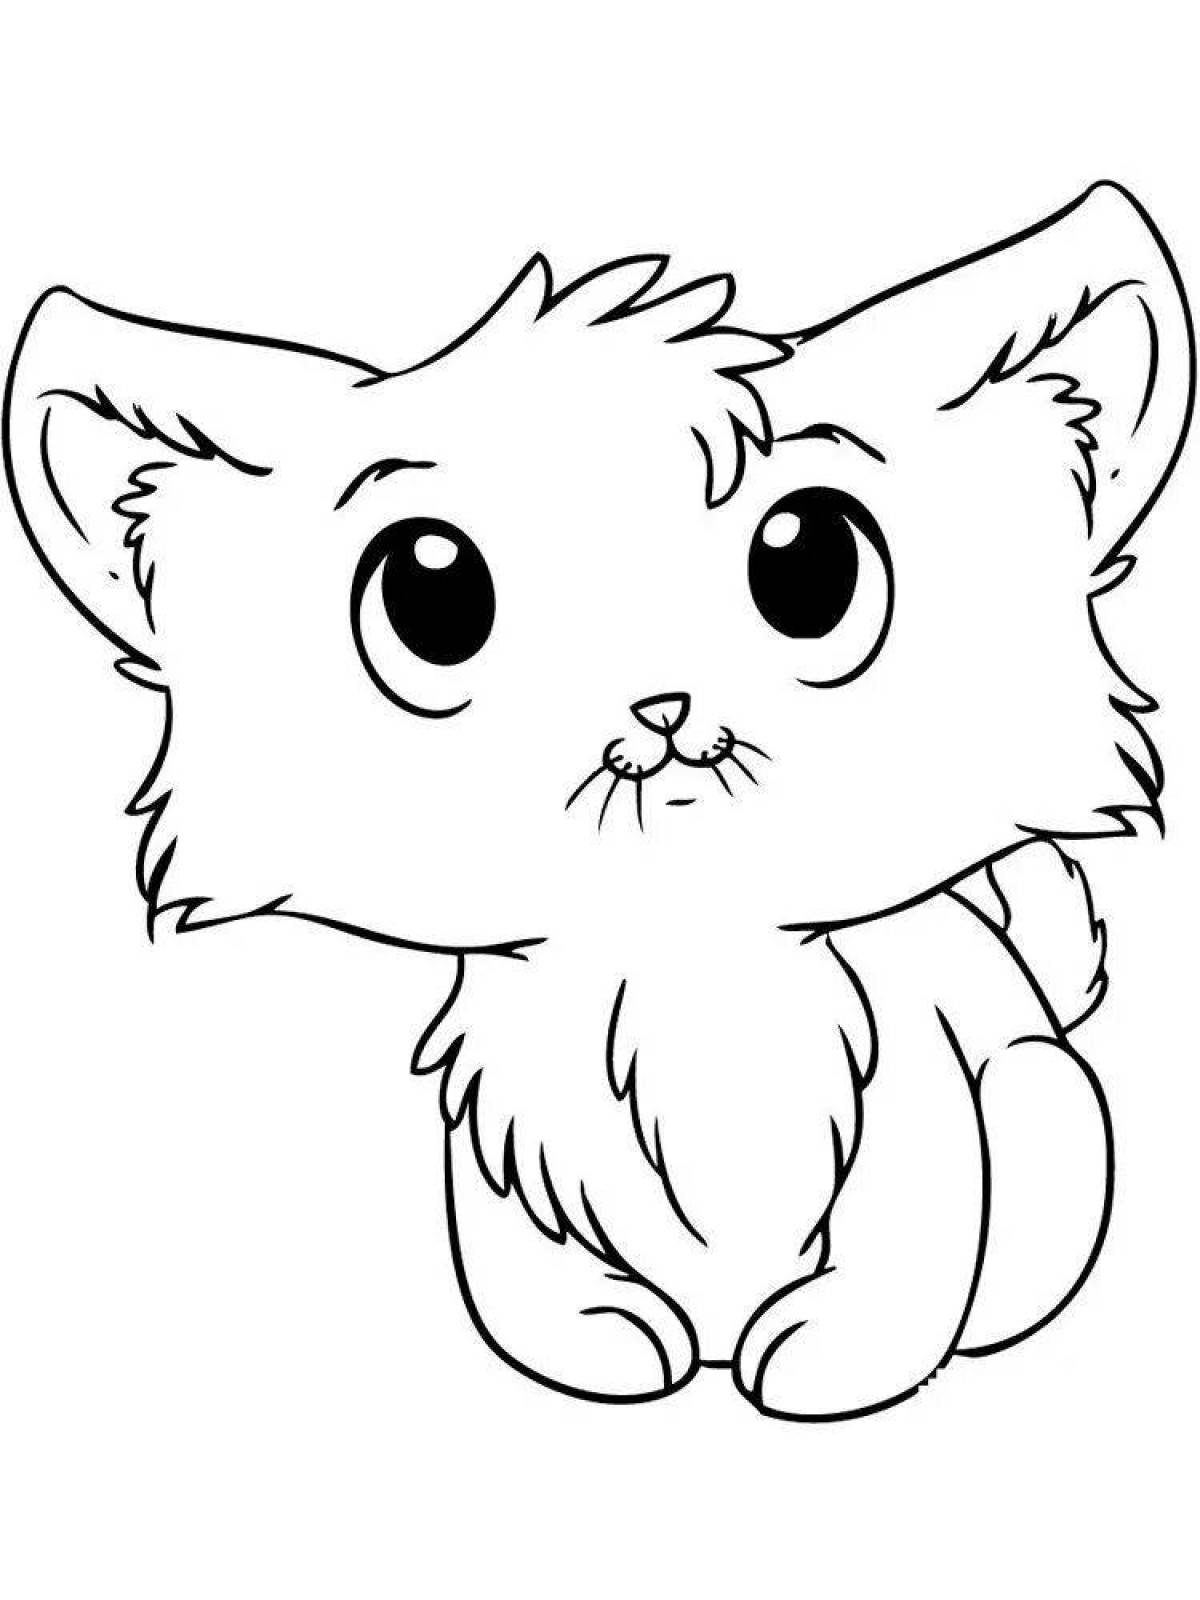 Cozy kittens coloring page